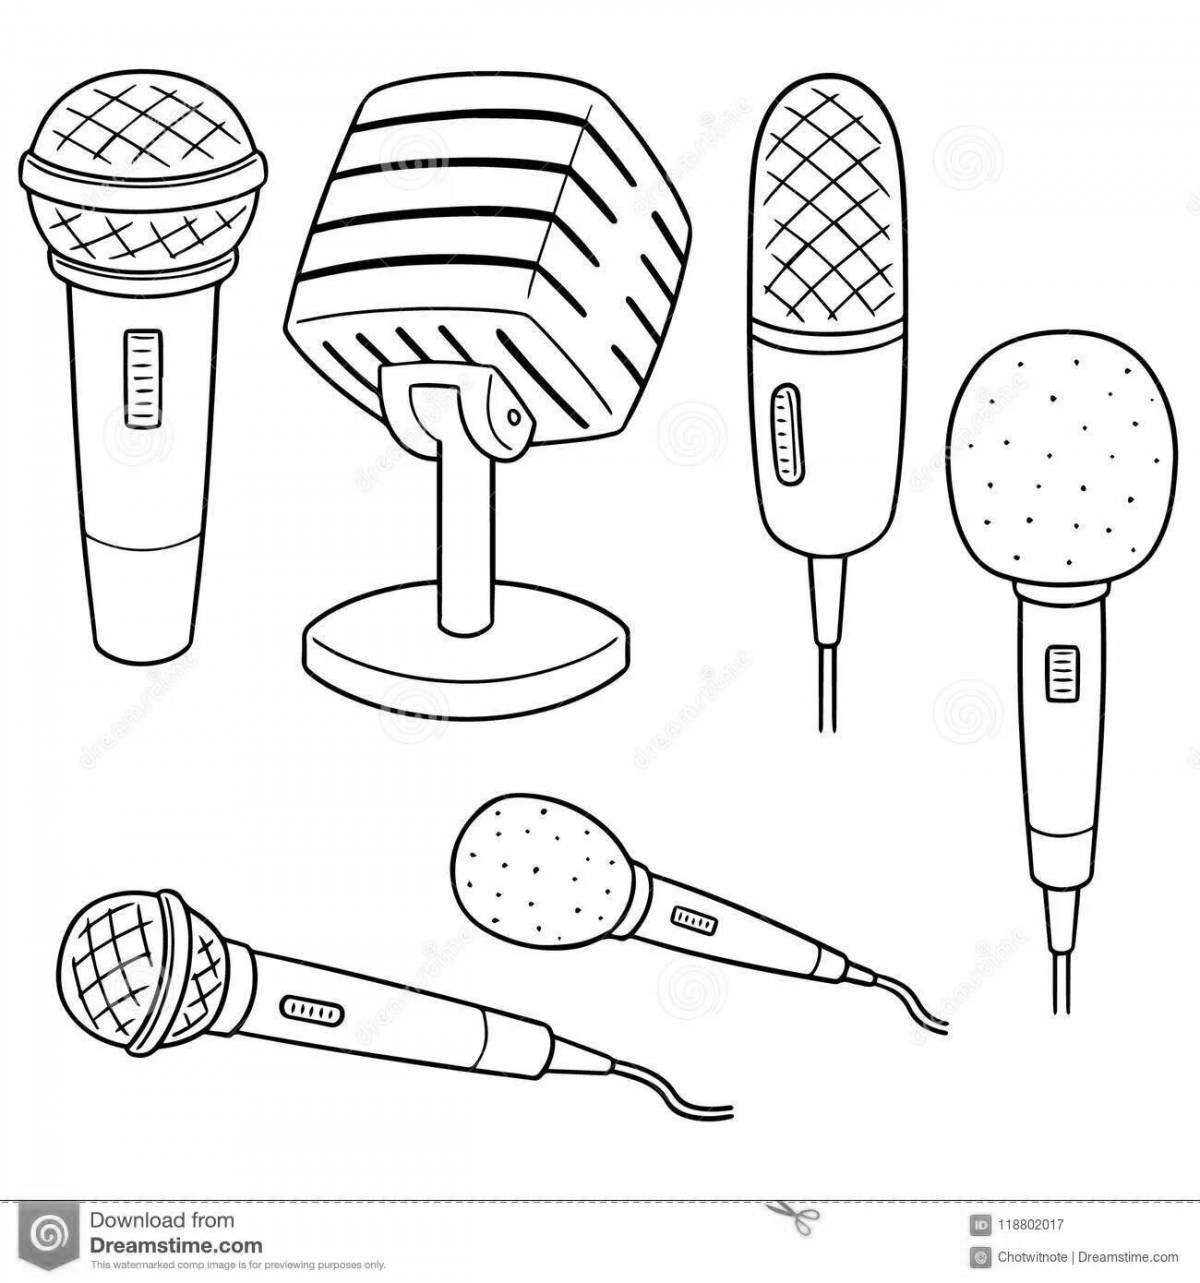 Cute microphone coloring page for kids